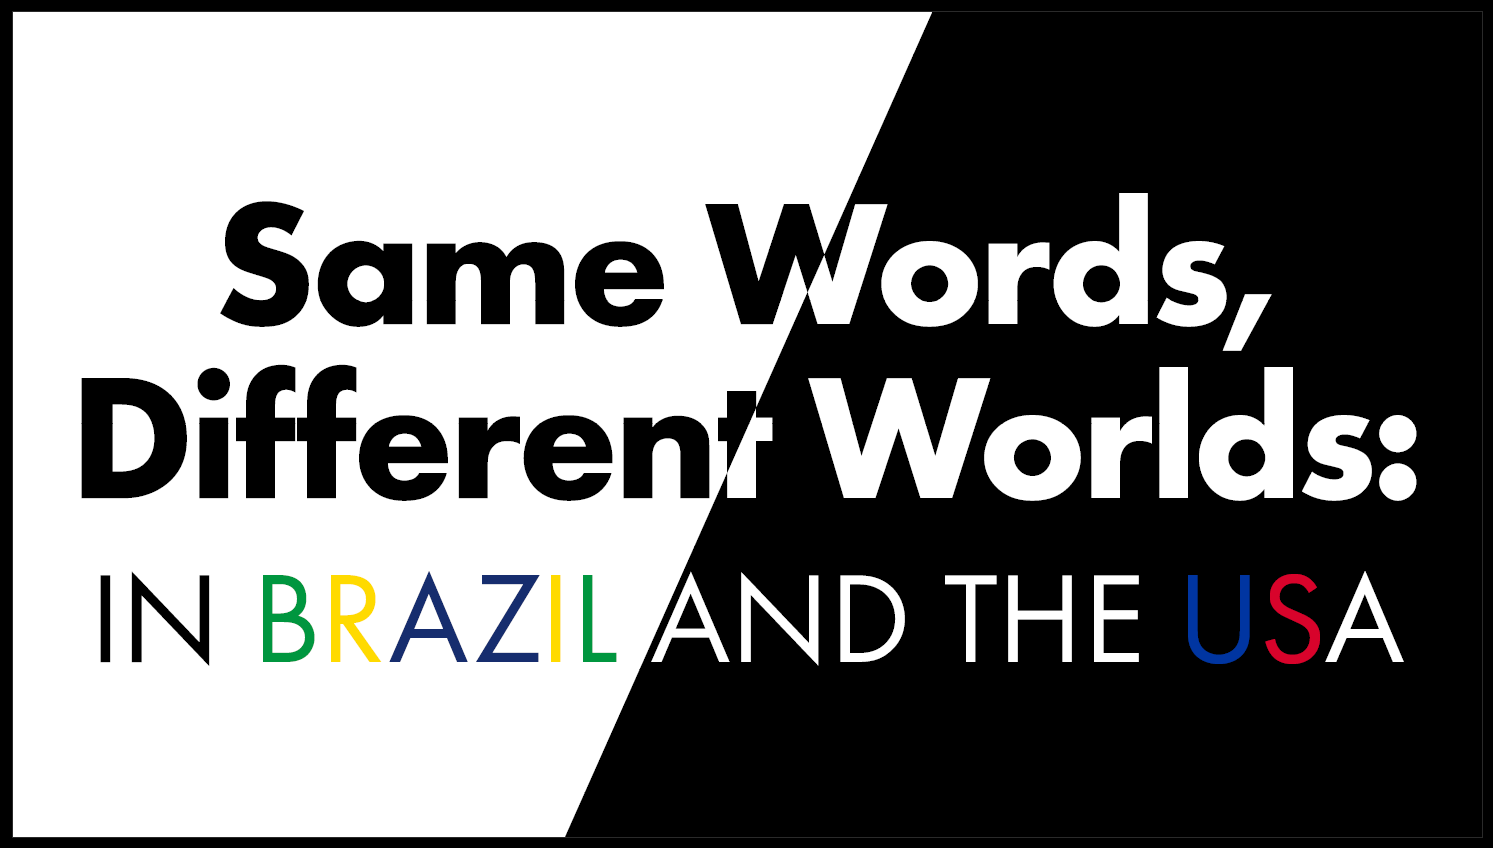 Same Words, Different Worlds: in Brazil and the USA